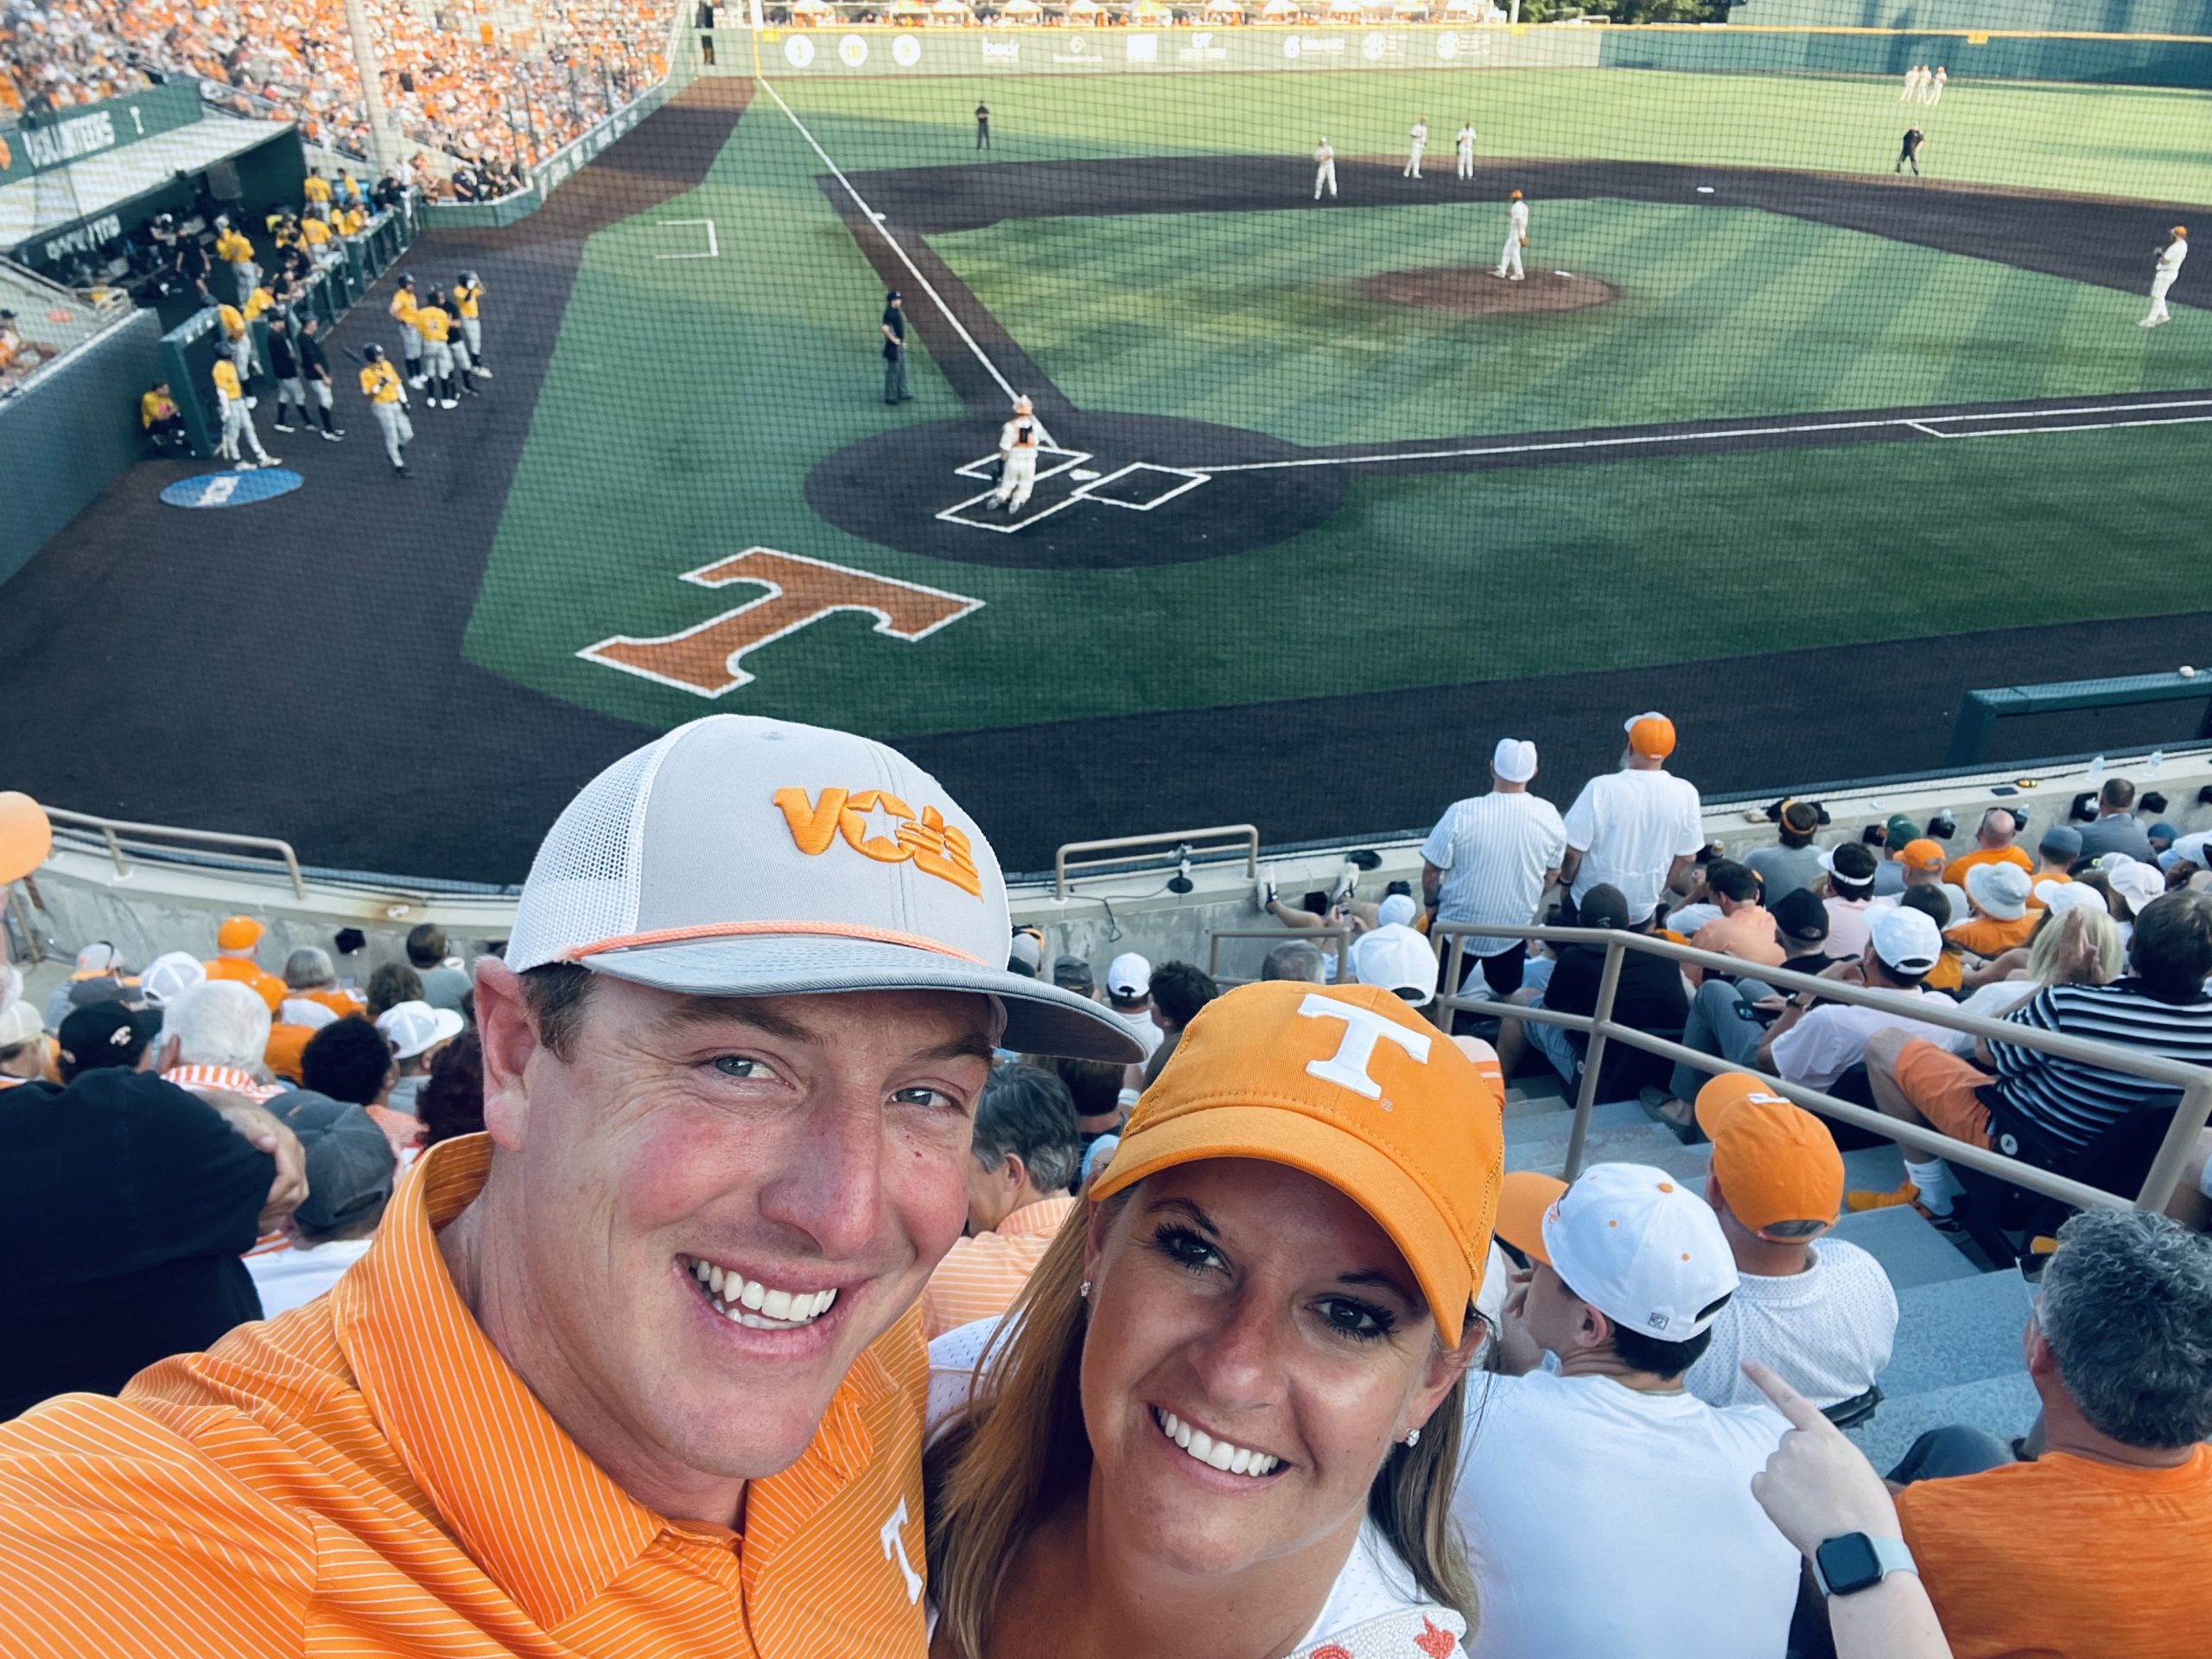 Chris Anglin and his wife at a Tennessee game.